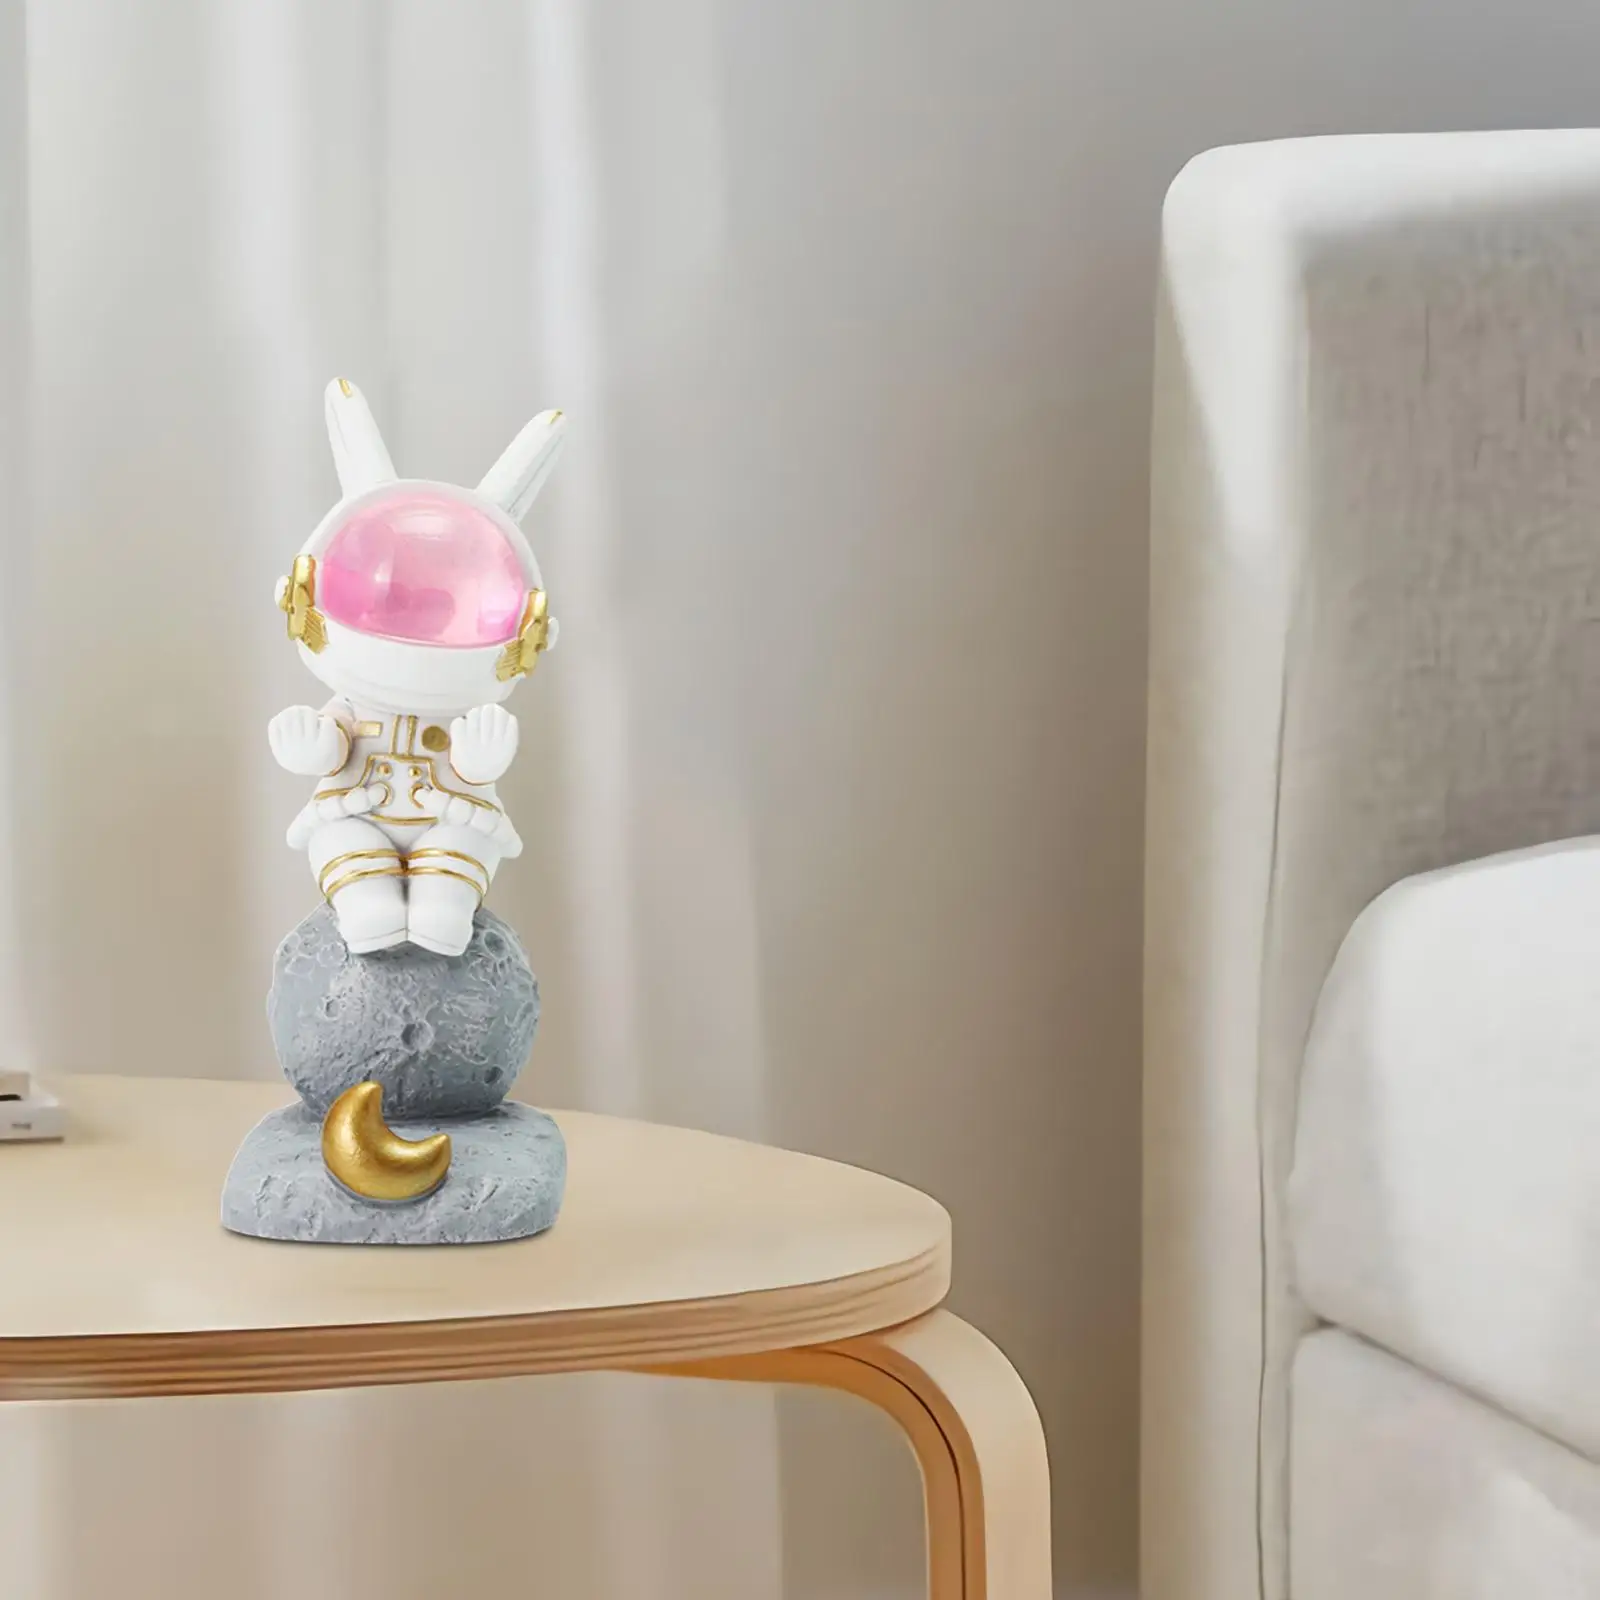 Space Rabbit Phone Holder Support Art Decor Decorative Night Light Bunny Statue Phone Stand for Home Table Car Dashboard Bedroom